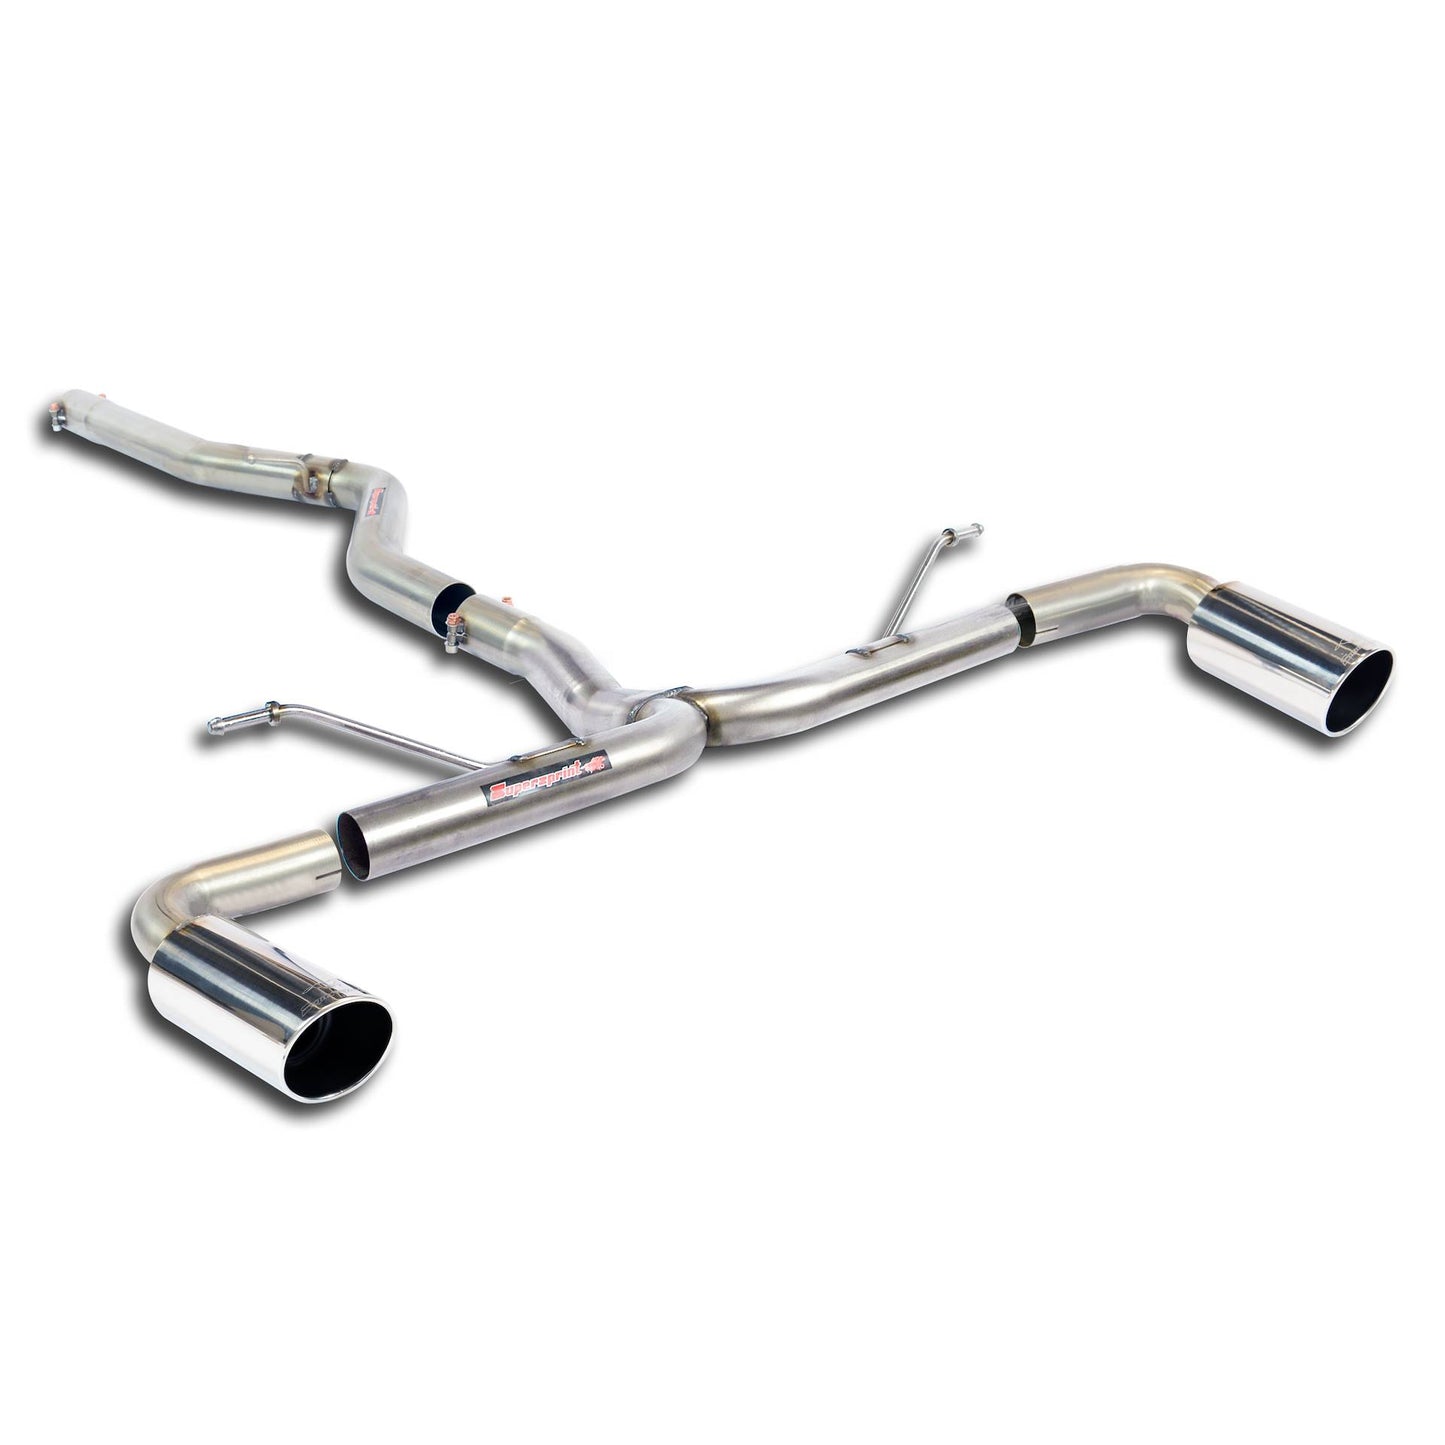 Supersprint BMW N47 F20 F21 116d Muffler Delete Rear Exhaust and Connecting Pipe - Left & Right Tips